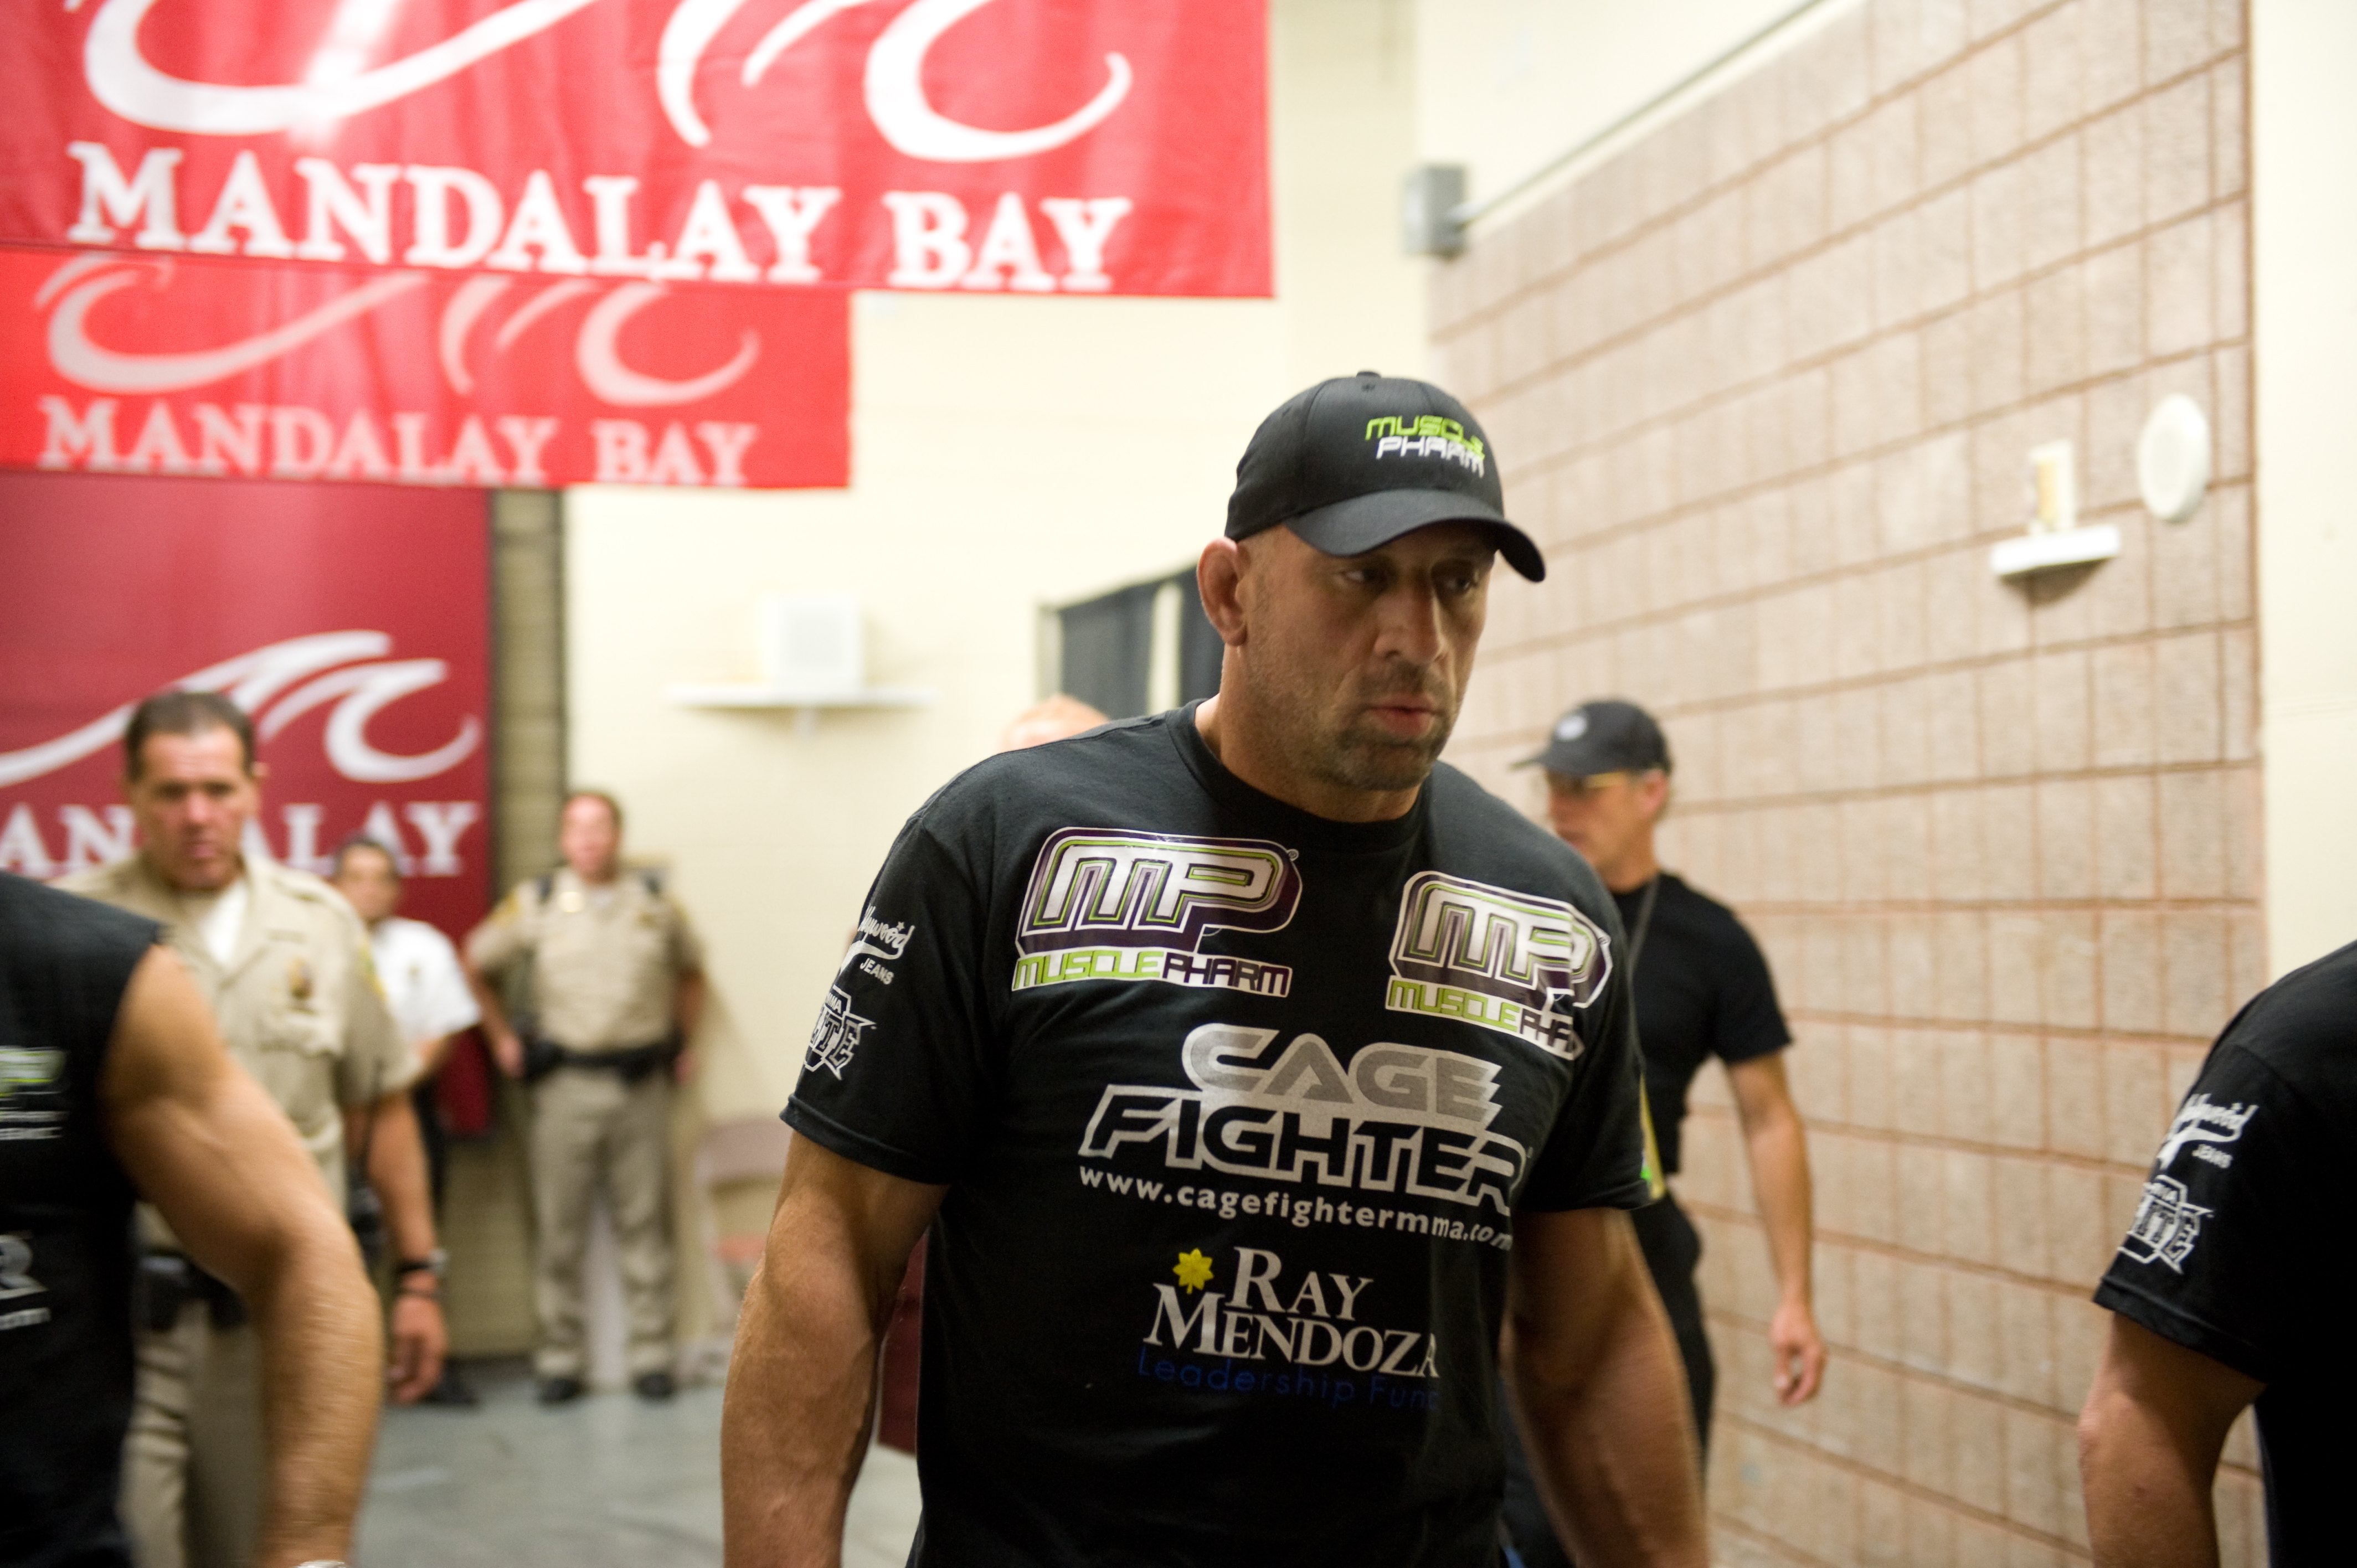 Mark Coleman at the UFC 100 event in Las Vegas, Nevada on July 11, 2009 | Source: Getty Images